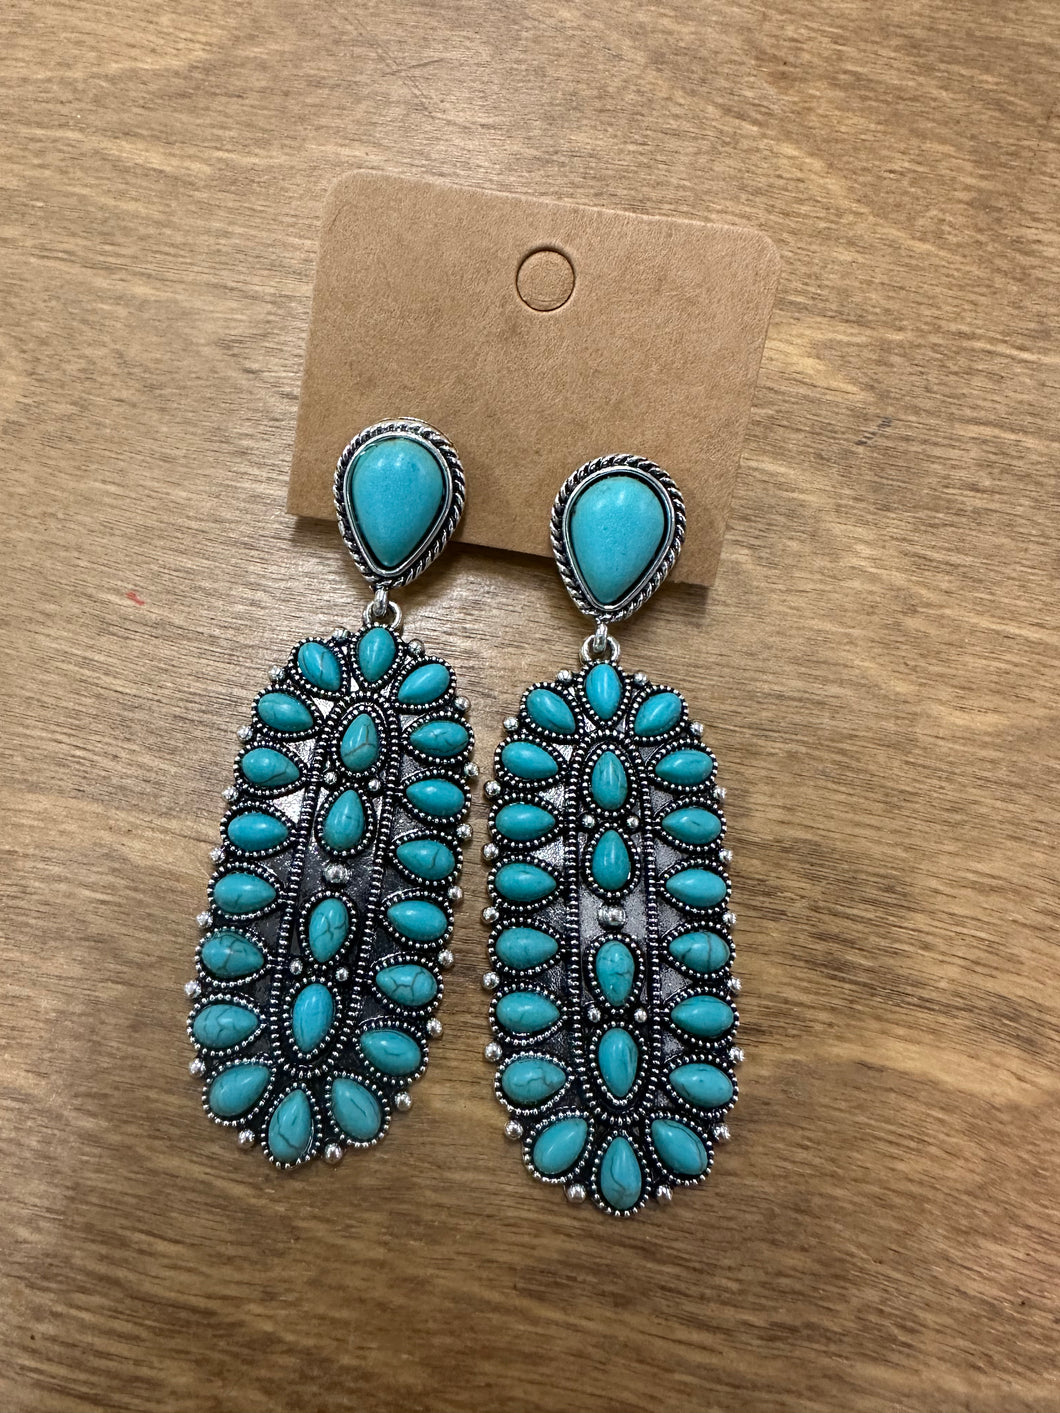 Turquoise + Silver Squash Blossom Earrings